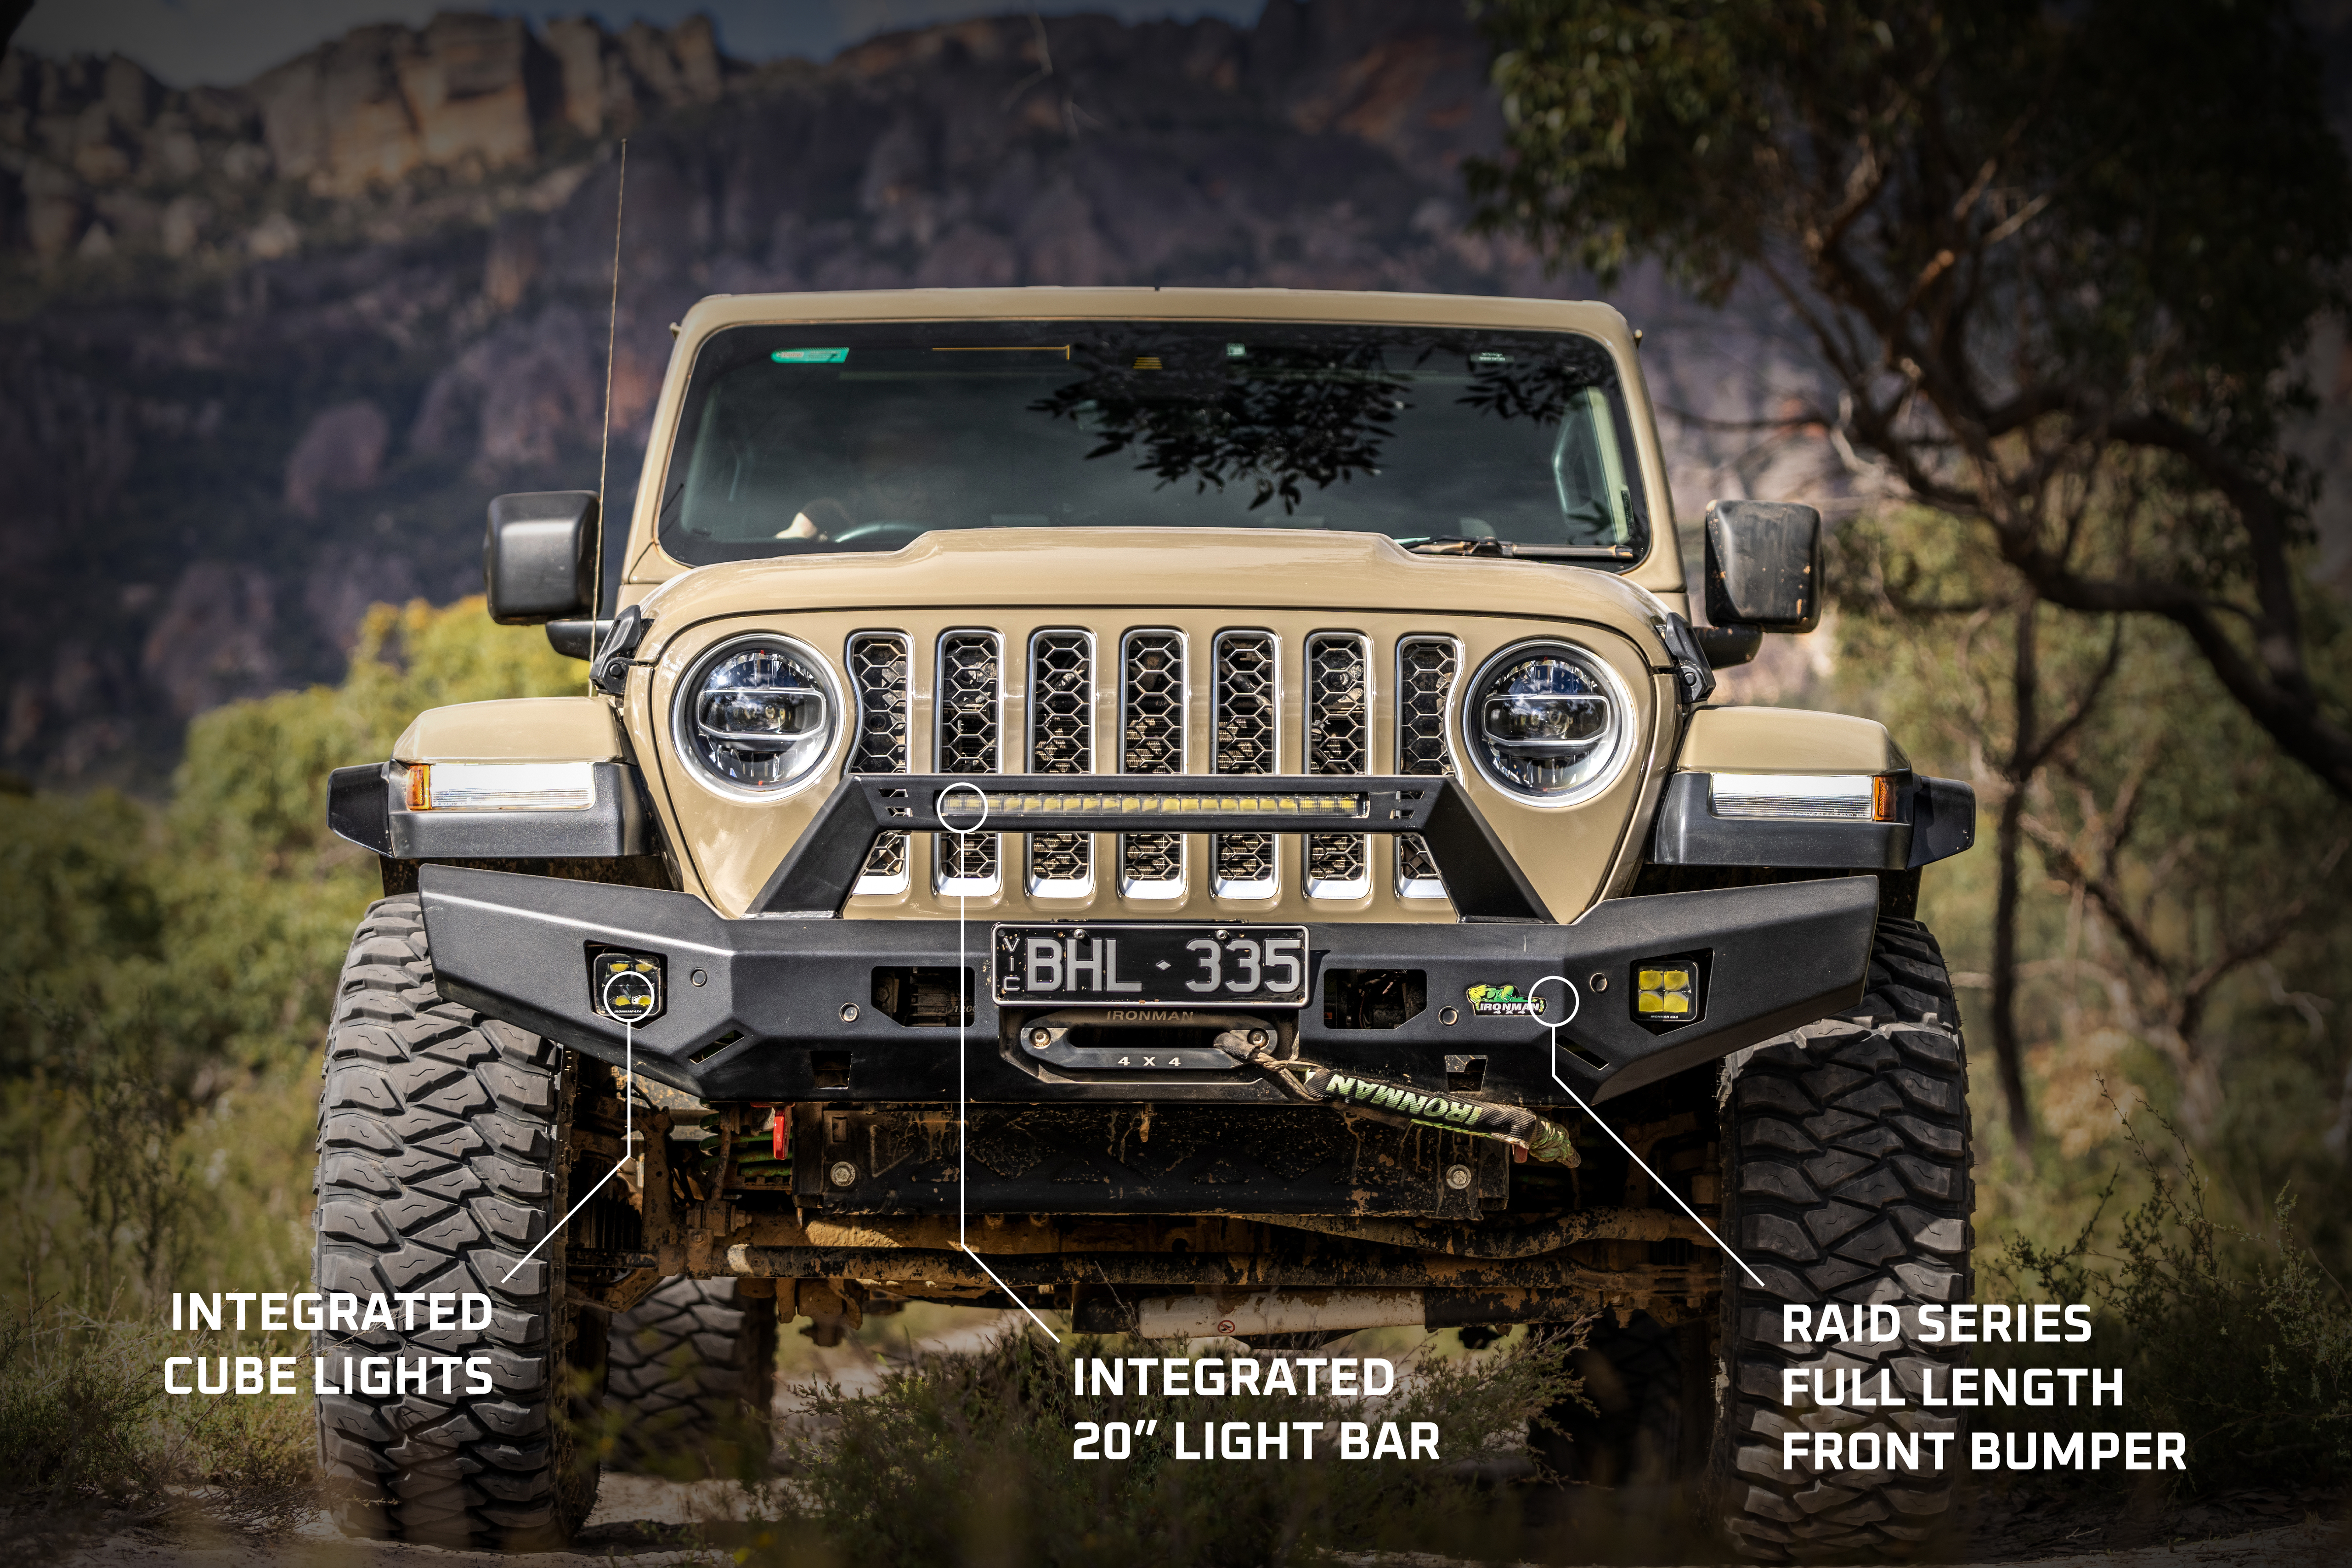 Raid Series Full Length Front Bumper Kit Suited for Jeep Gladiator JT Questions & Answers